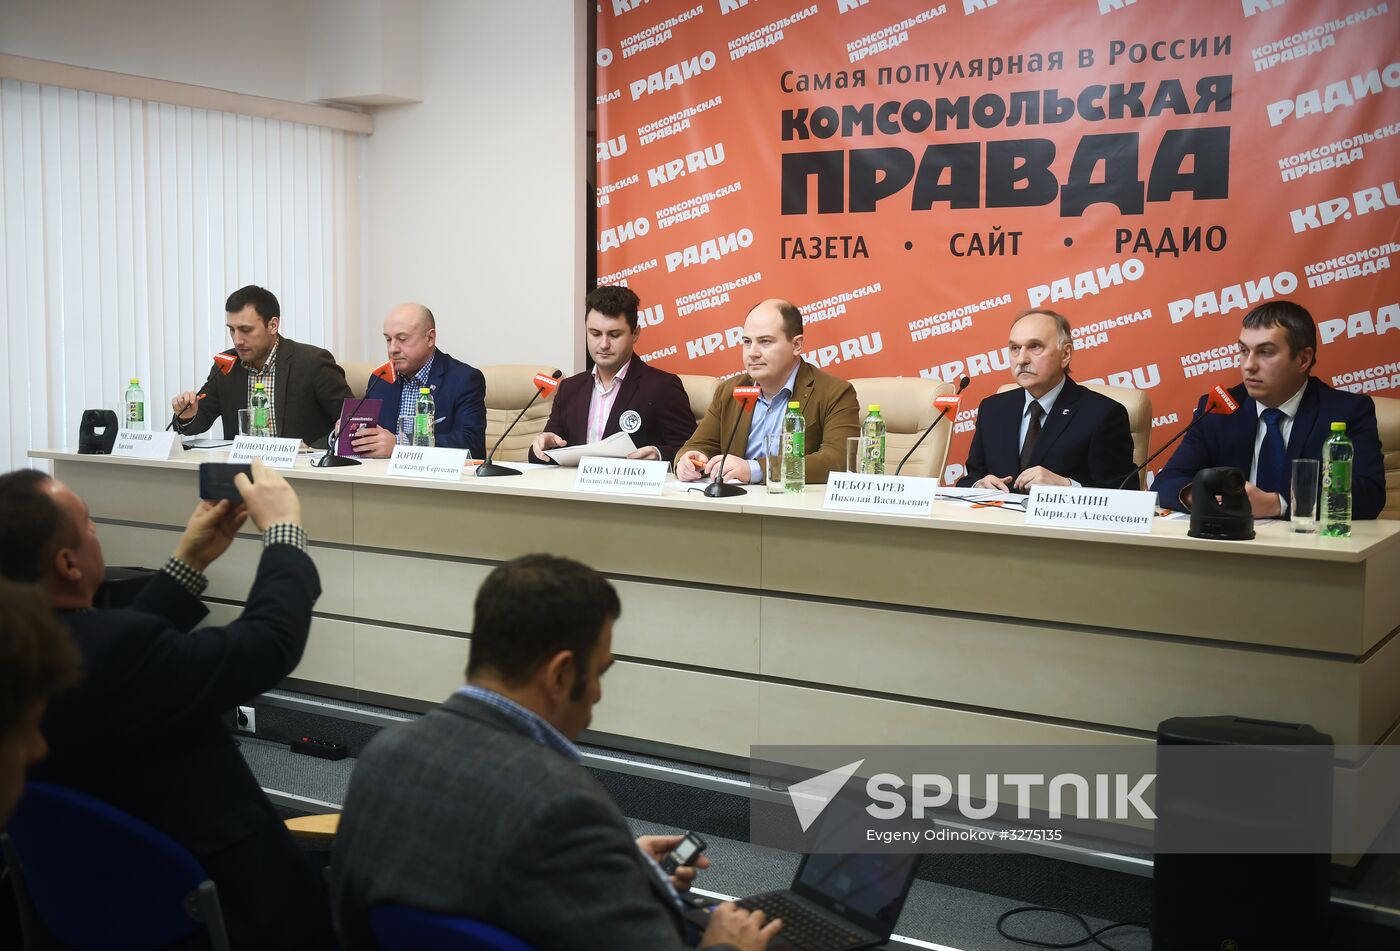 News conference by political bloc, 'Vladimir Putin, the majority's candidate'